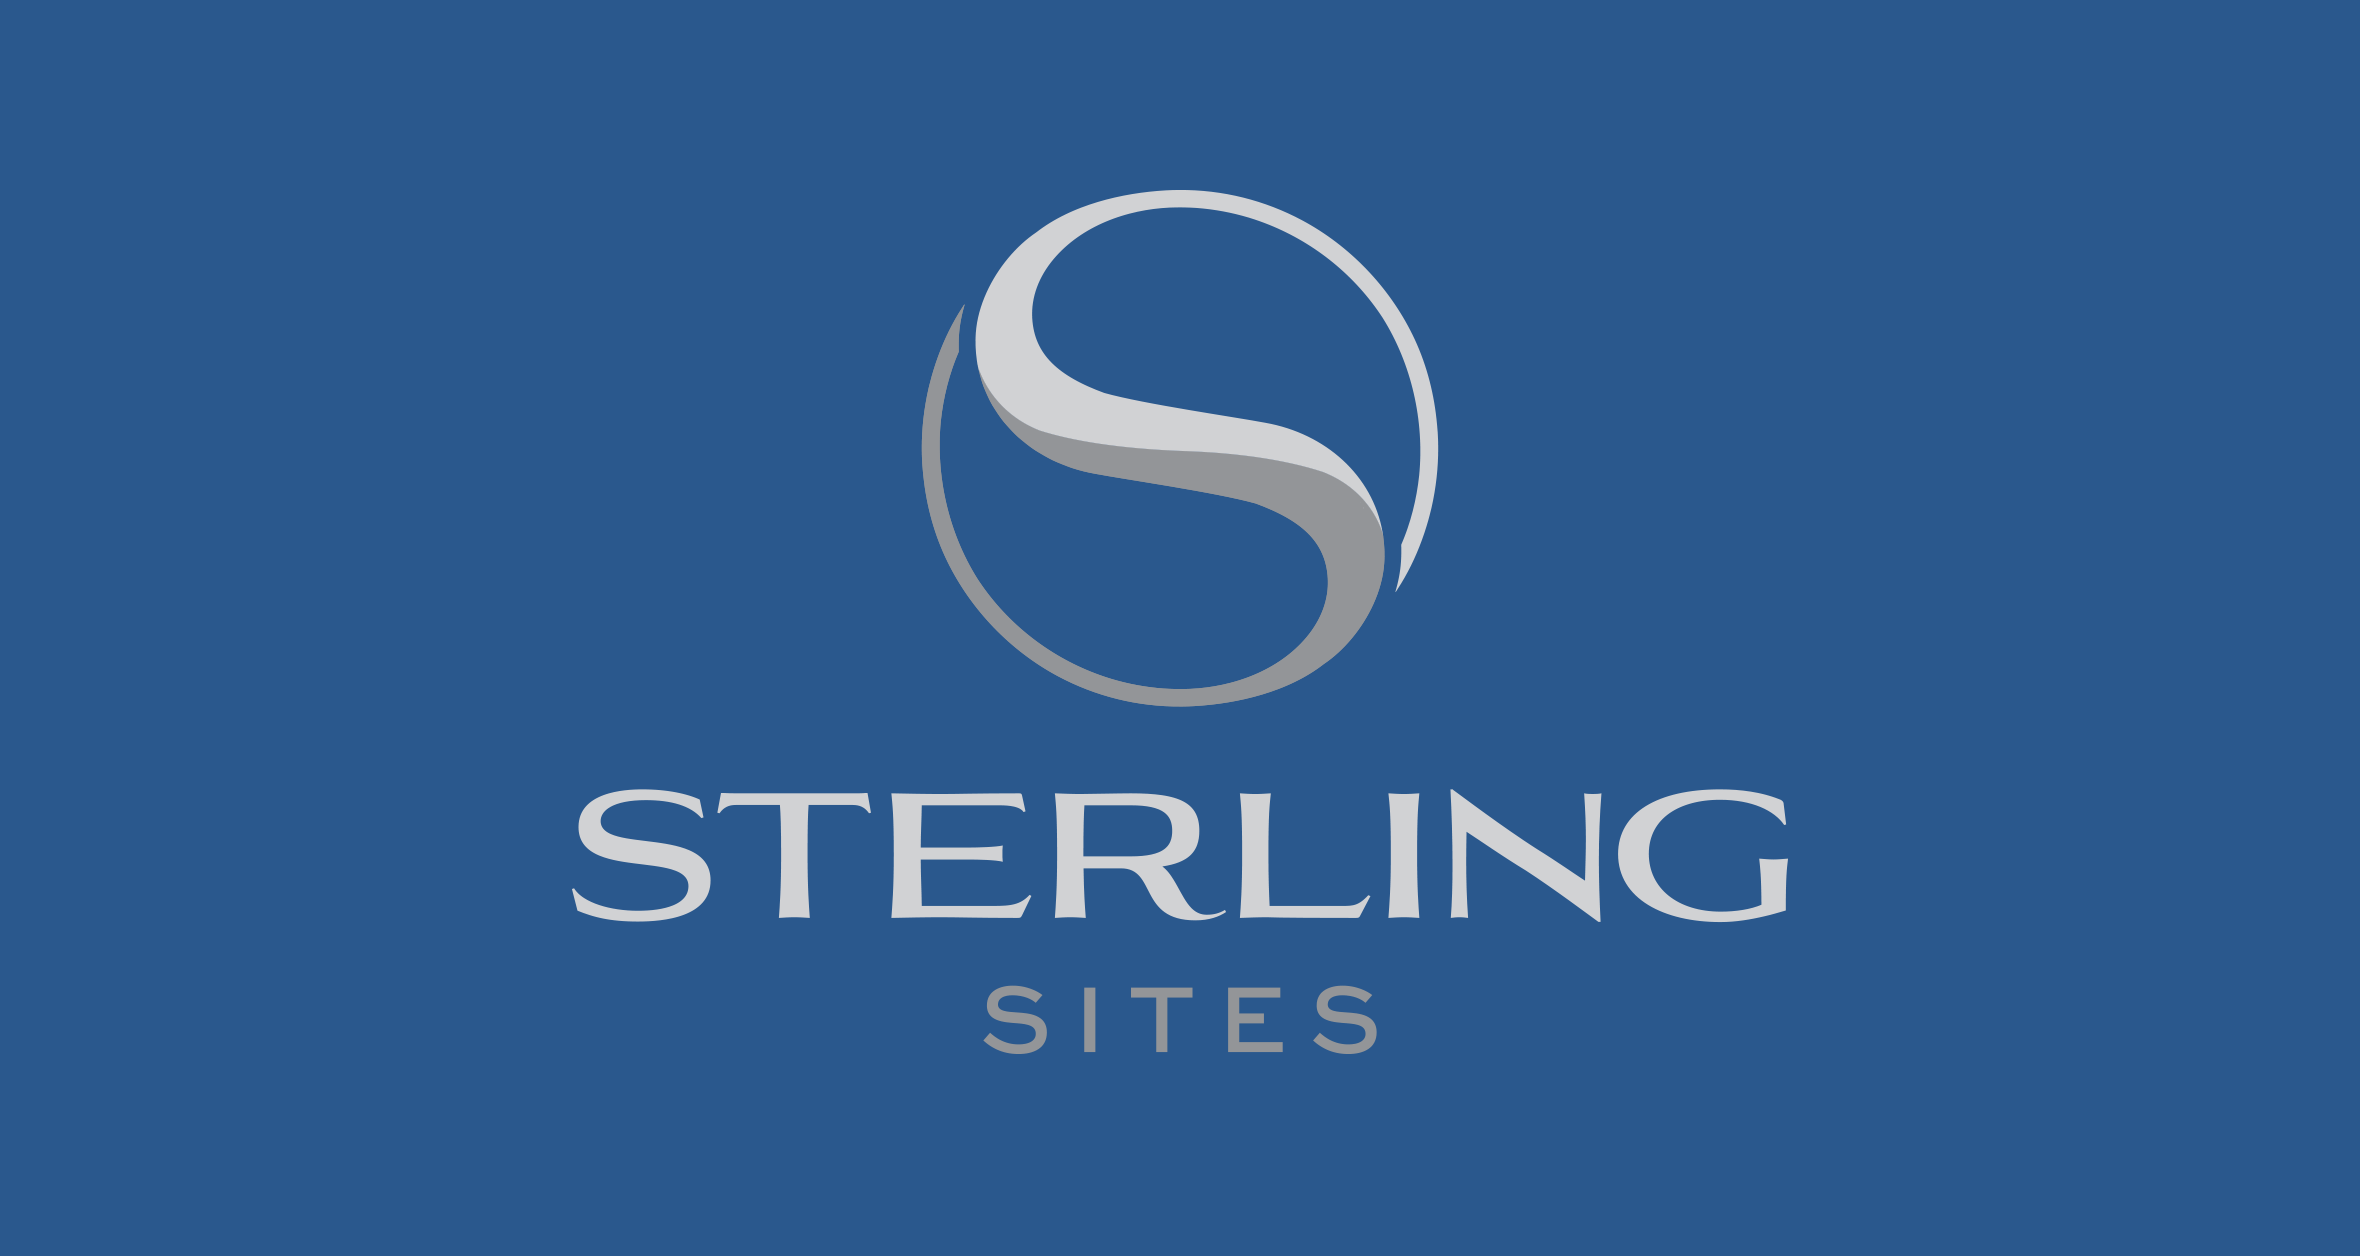 port-sterling-sites-full-width-2thirds-tall